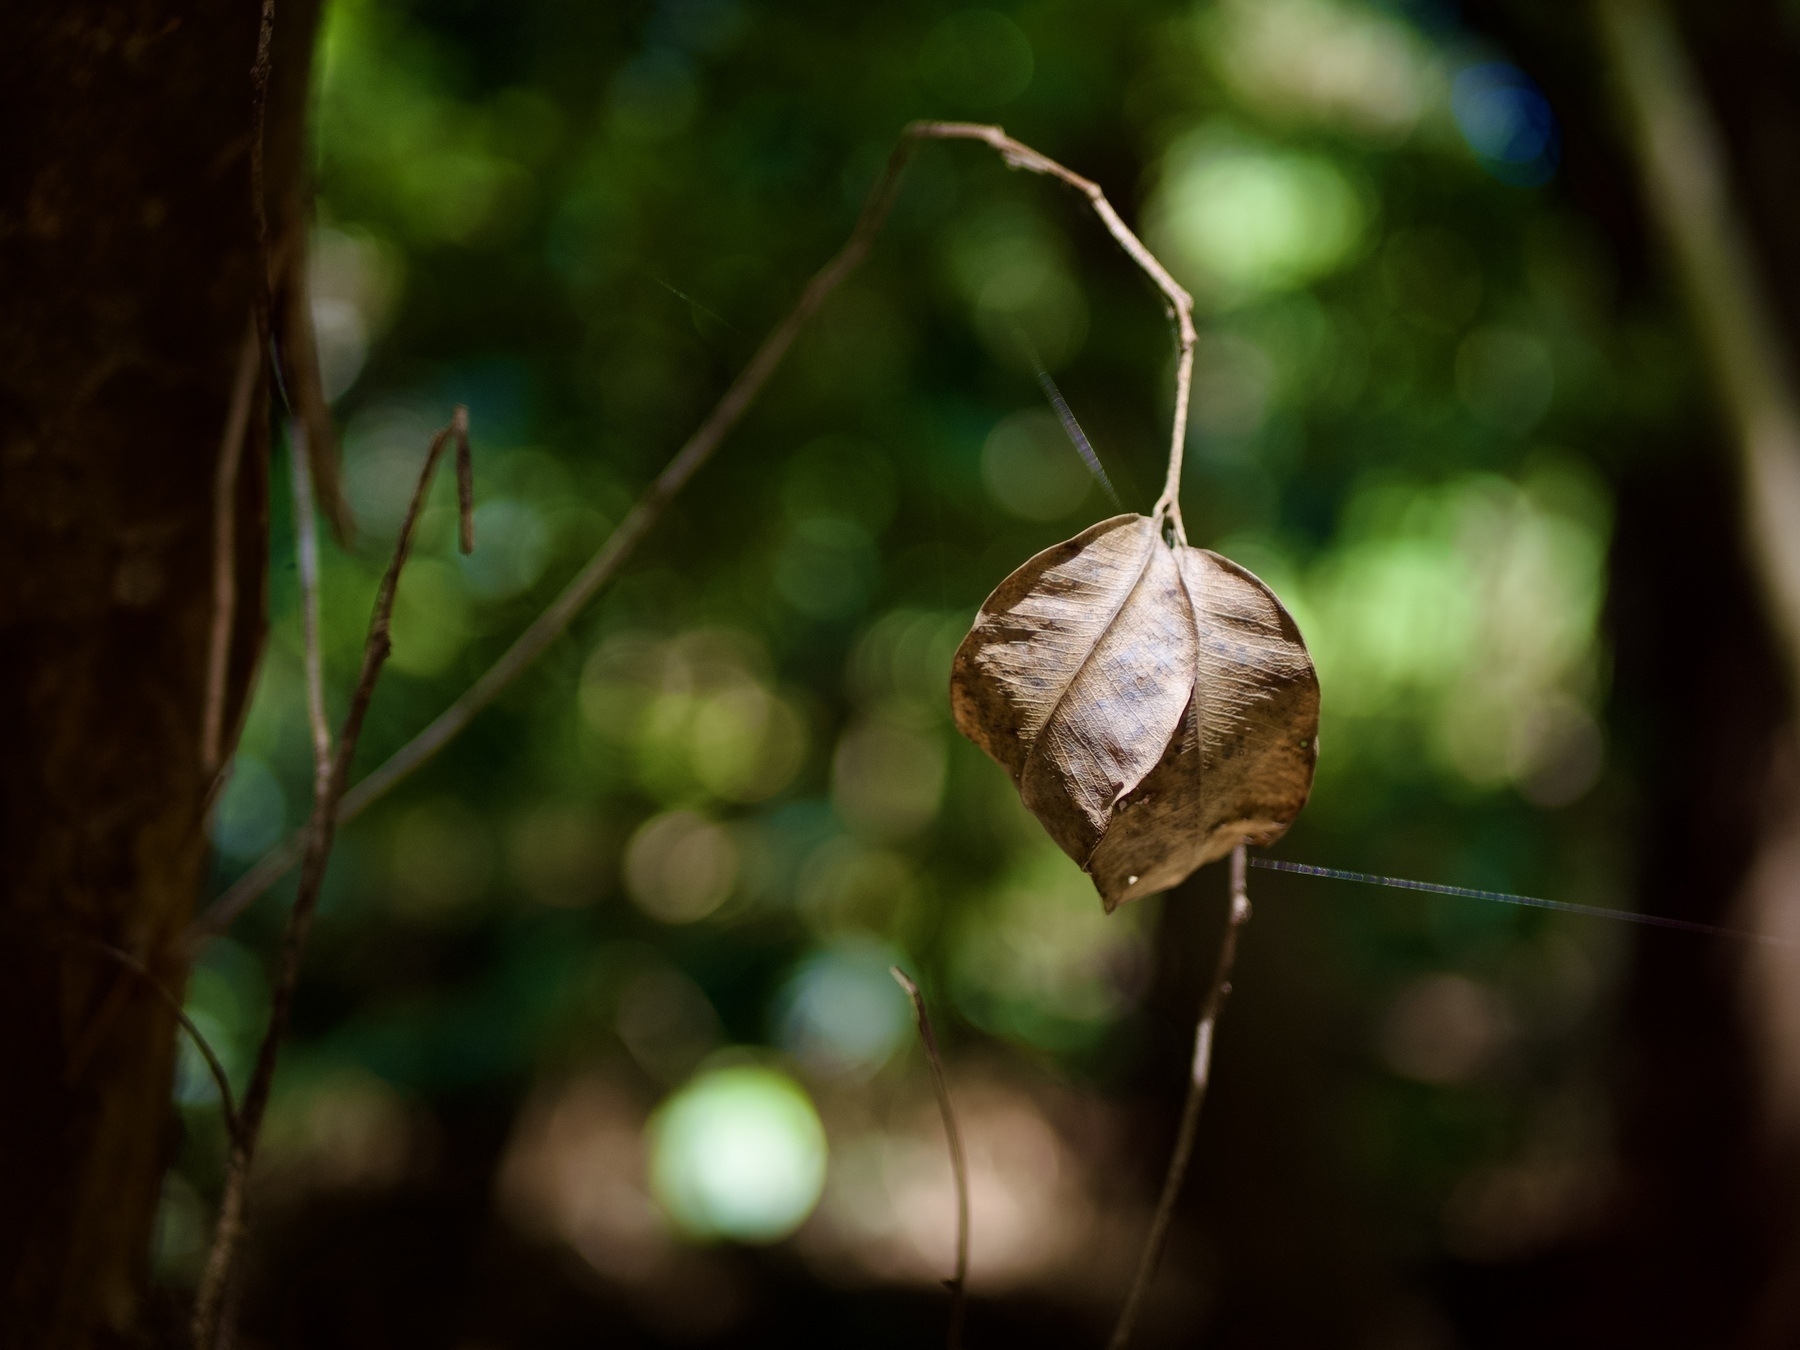 A dead leaf on the end of a twig, with visible strands of spider web